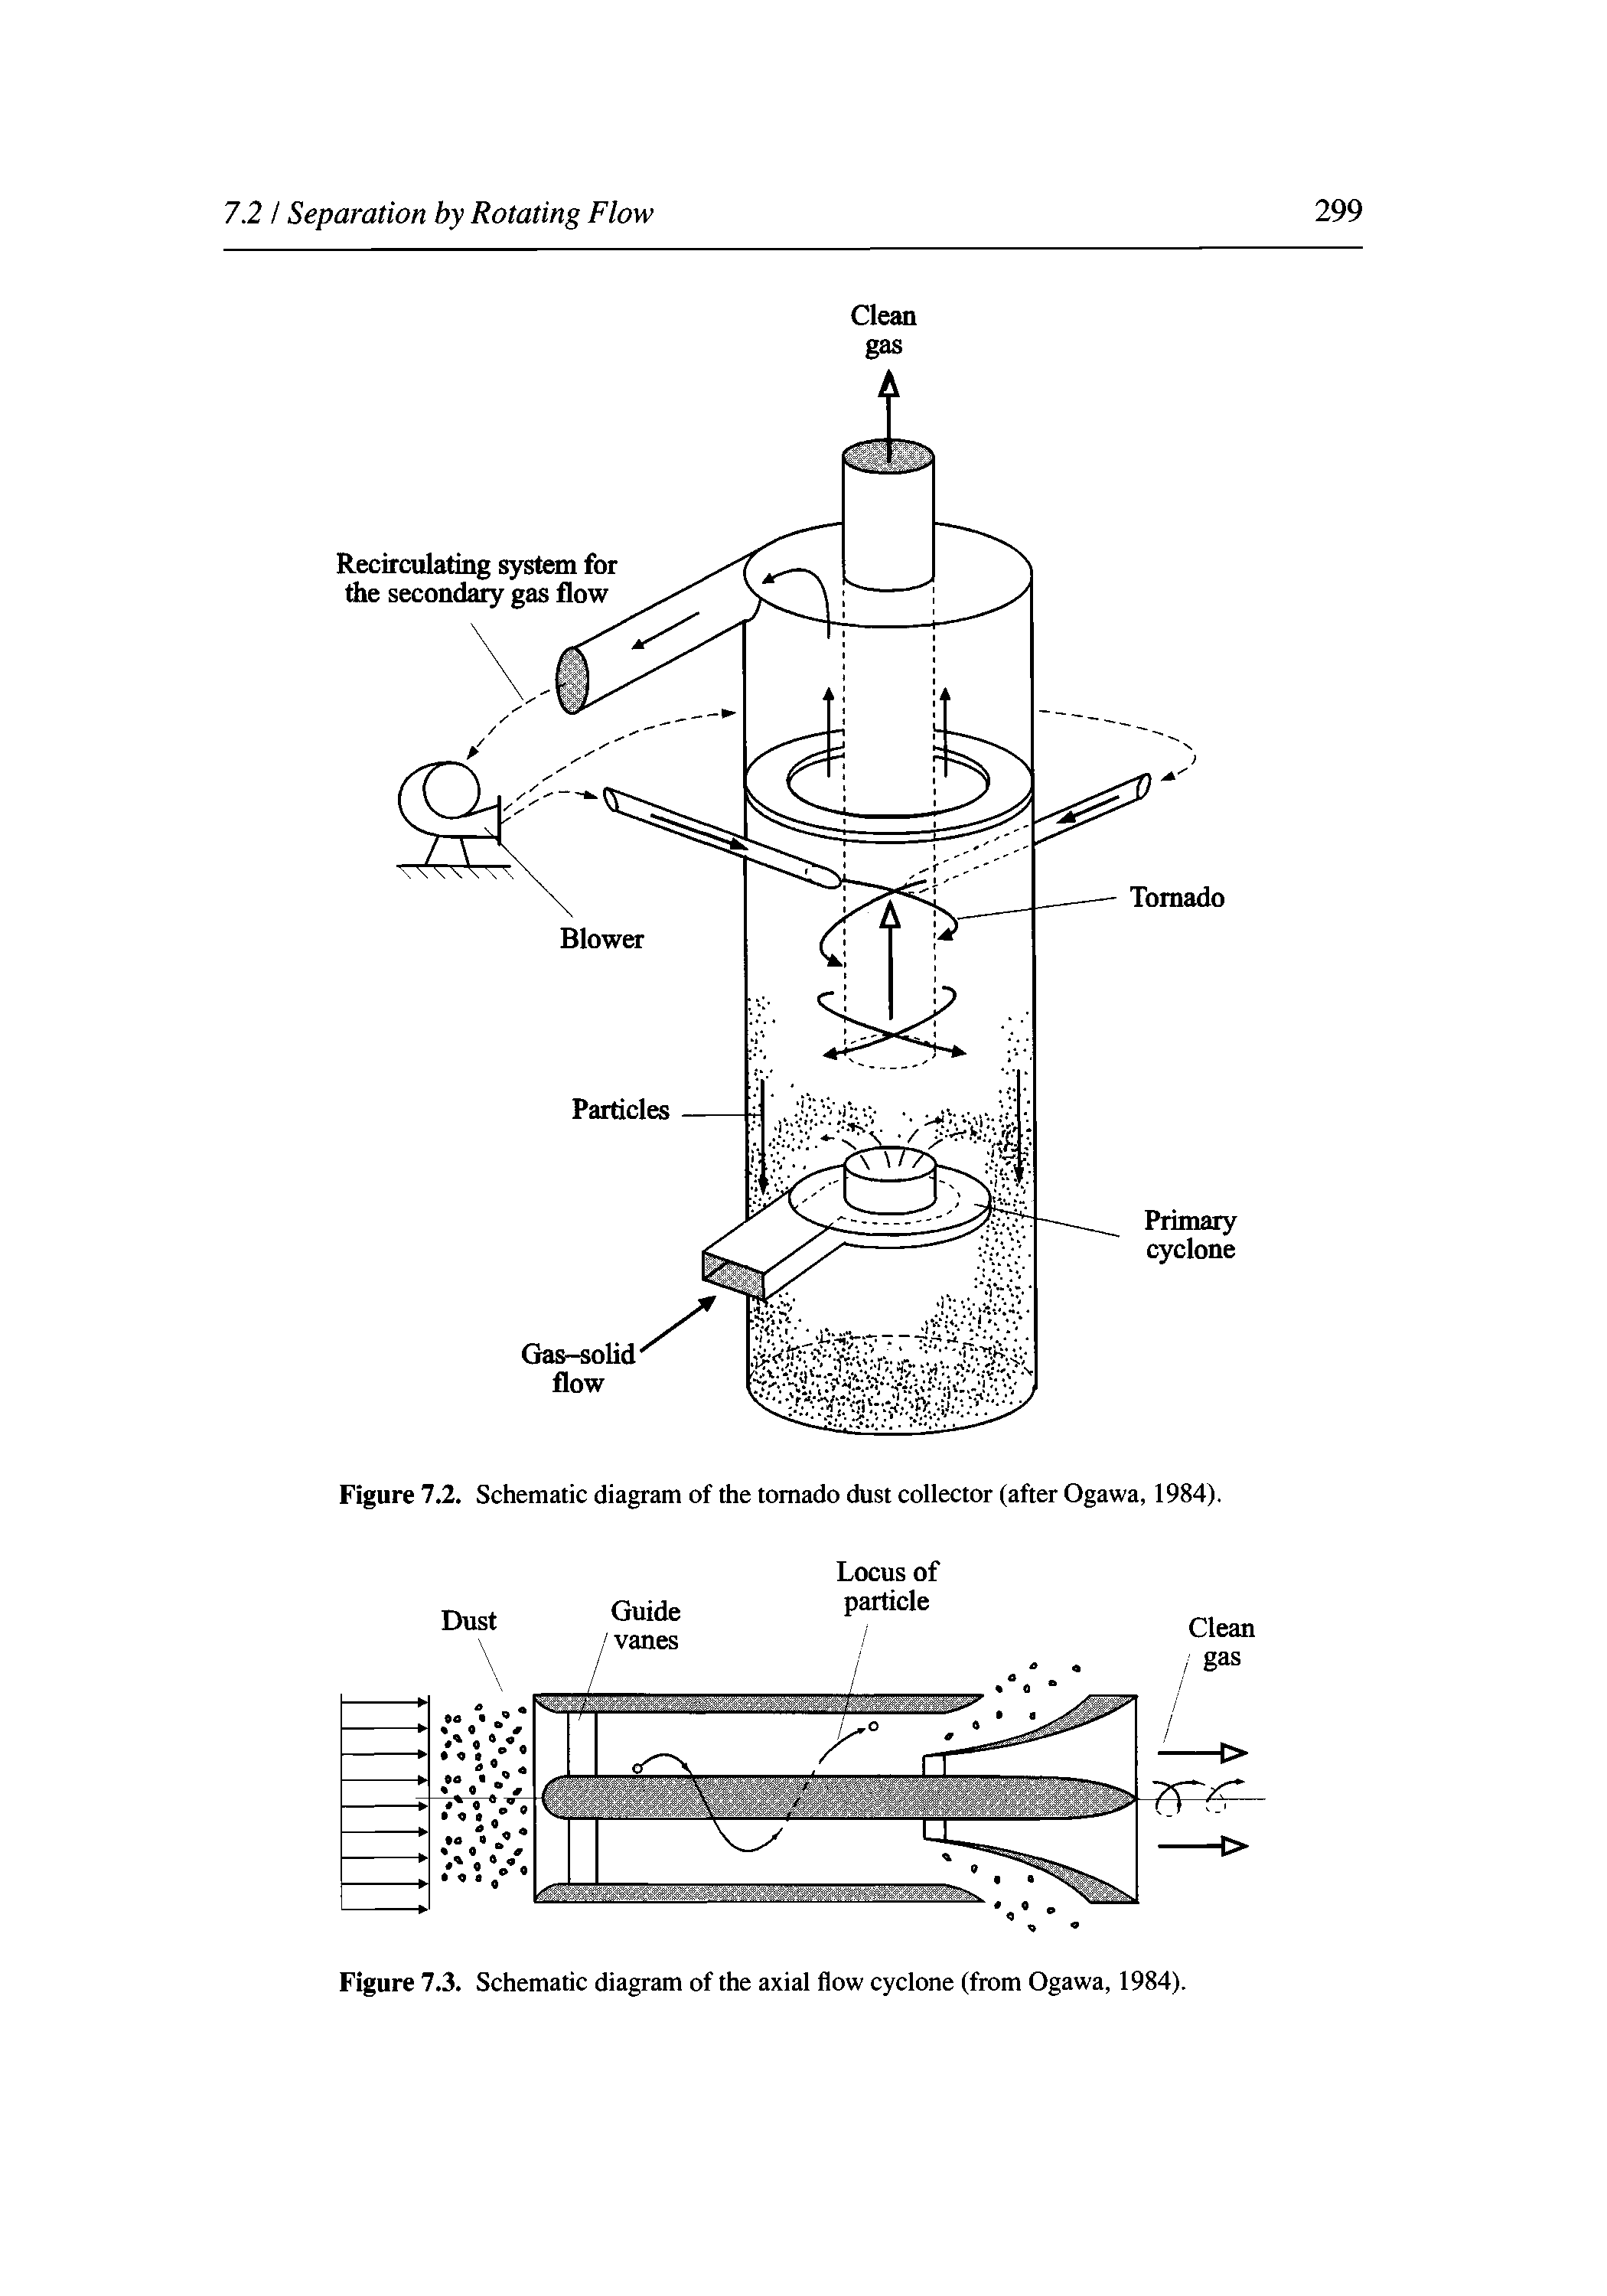 Figure 7.3. Schematic diagram of the axial flow cyclone (from Ogawa, 1984).